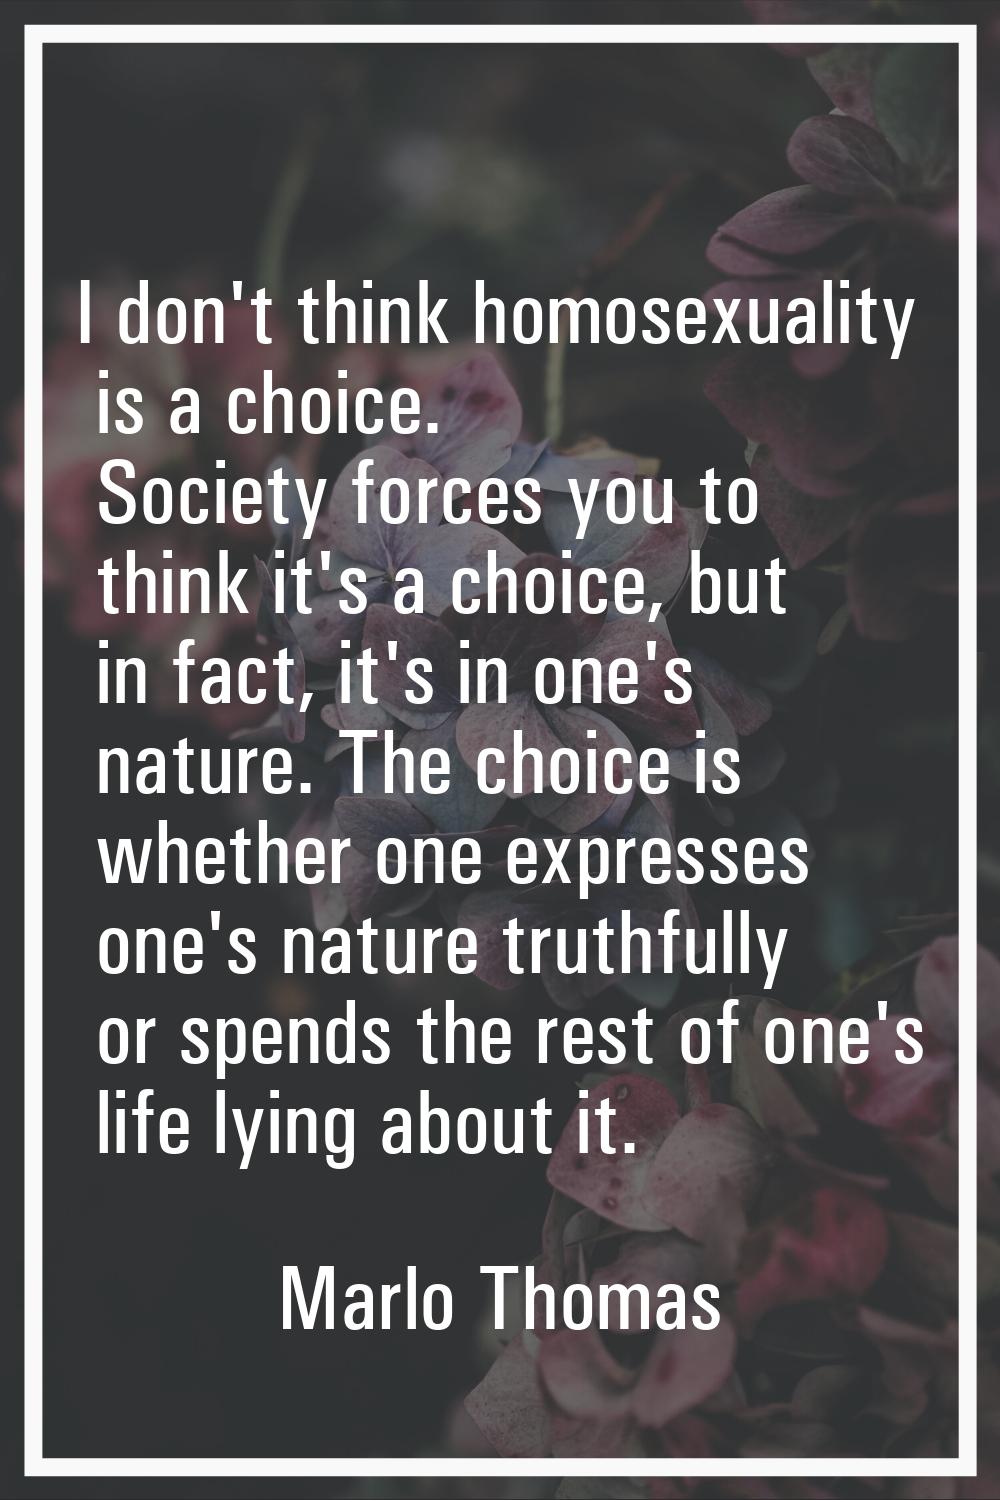 I don't think homosexuality is a choice. Society forces you to think it's a choice, but in fact, it